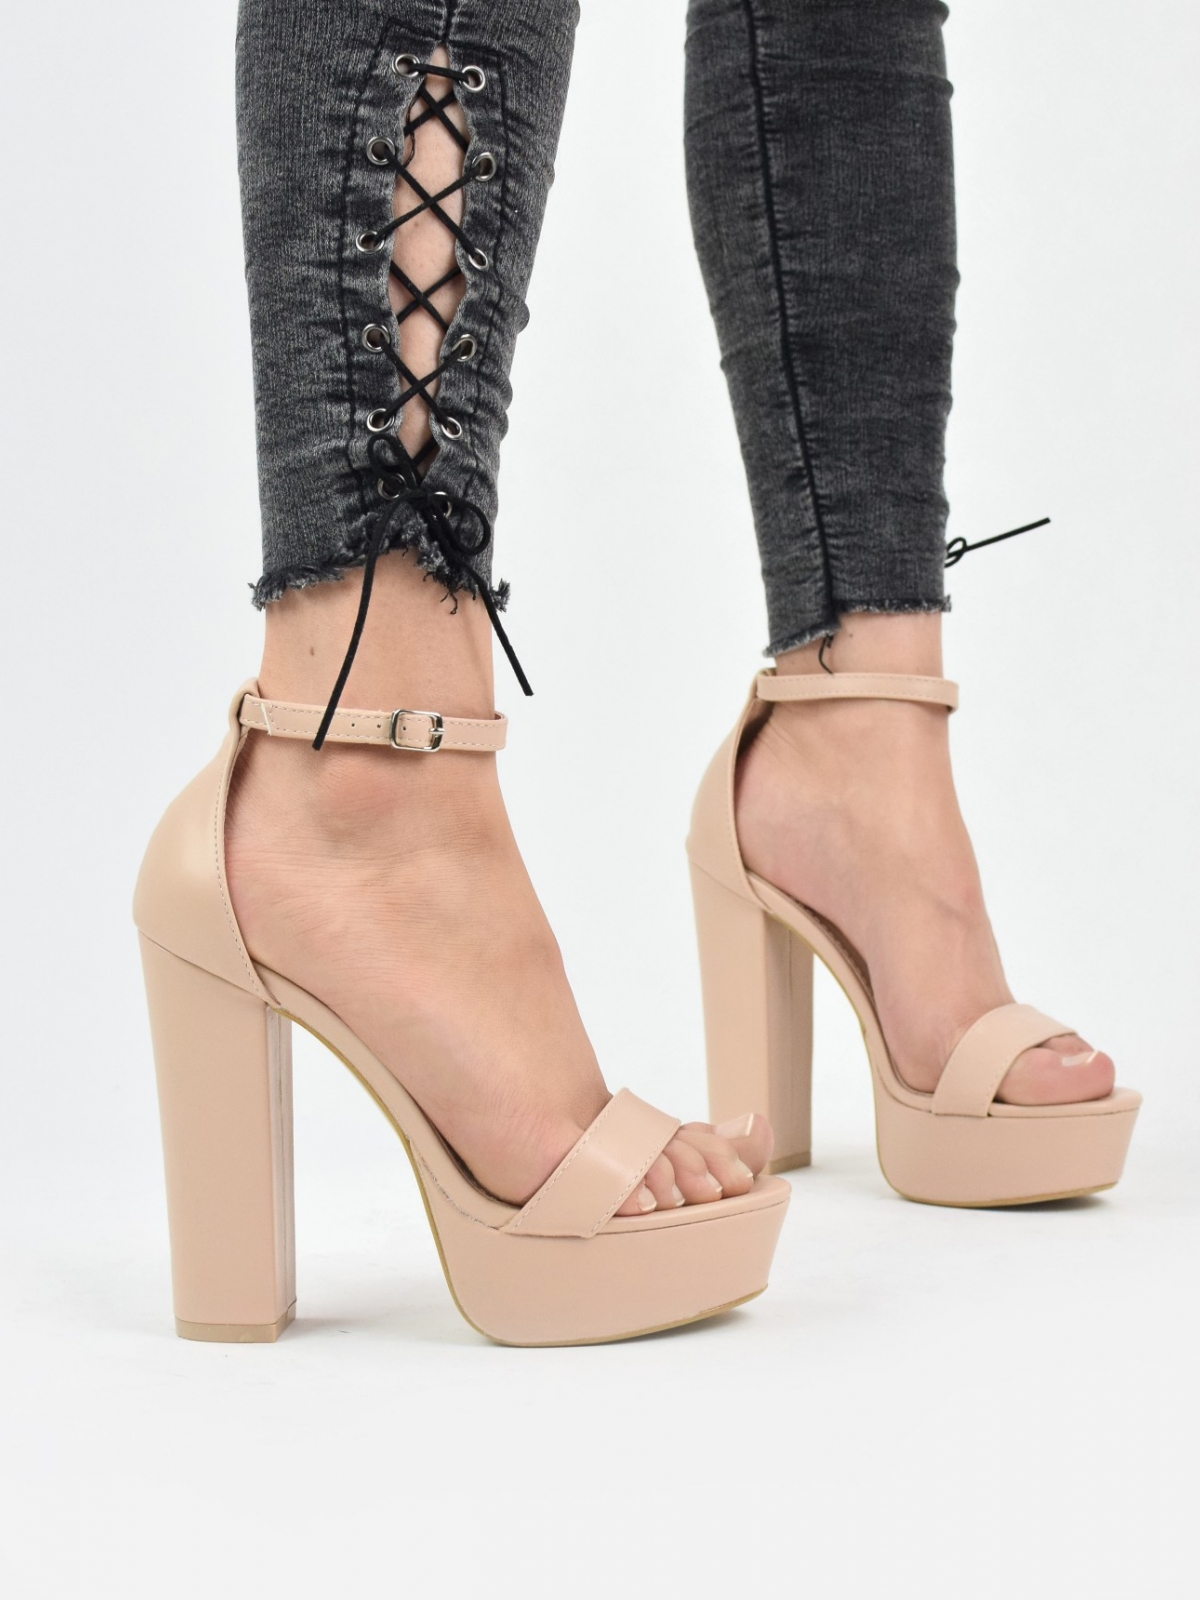 Stylish high heeled sandals with stable thick heel in beige